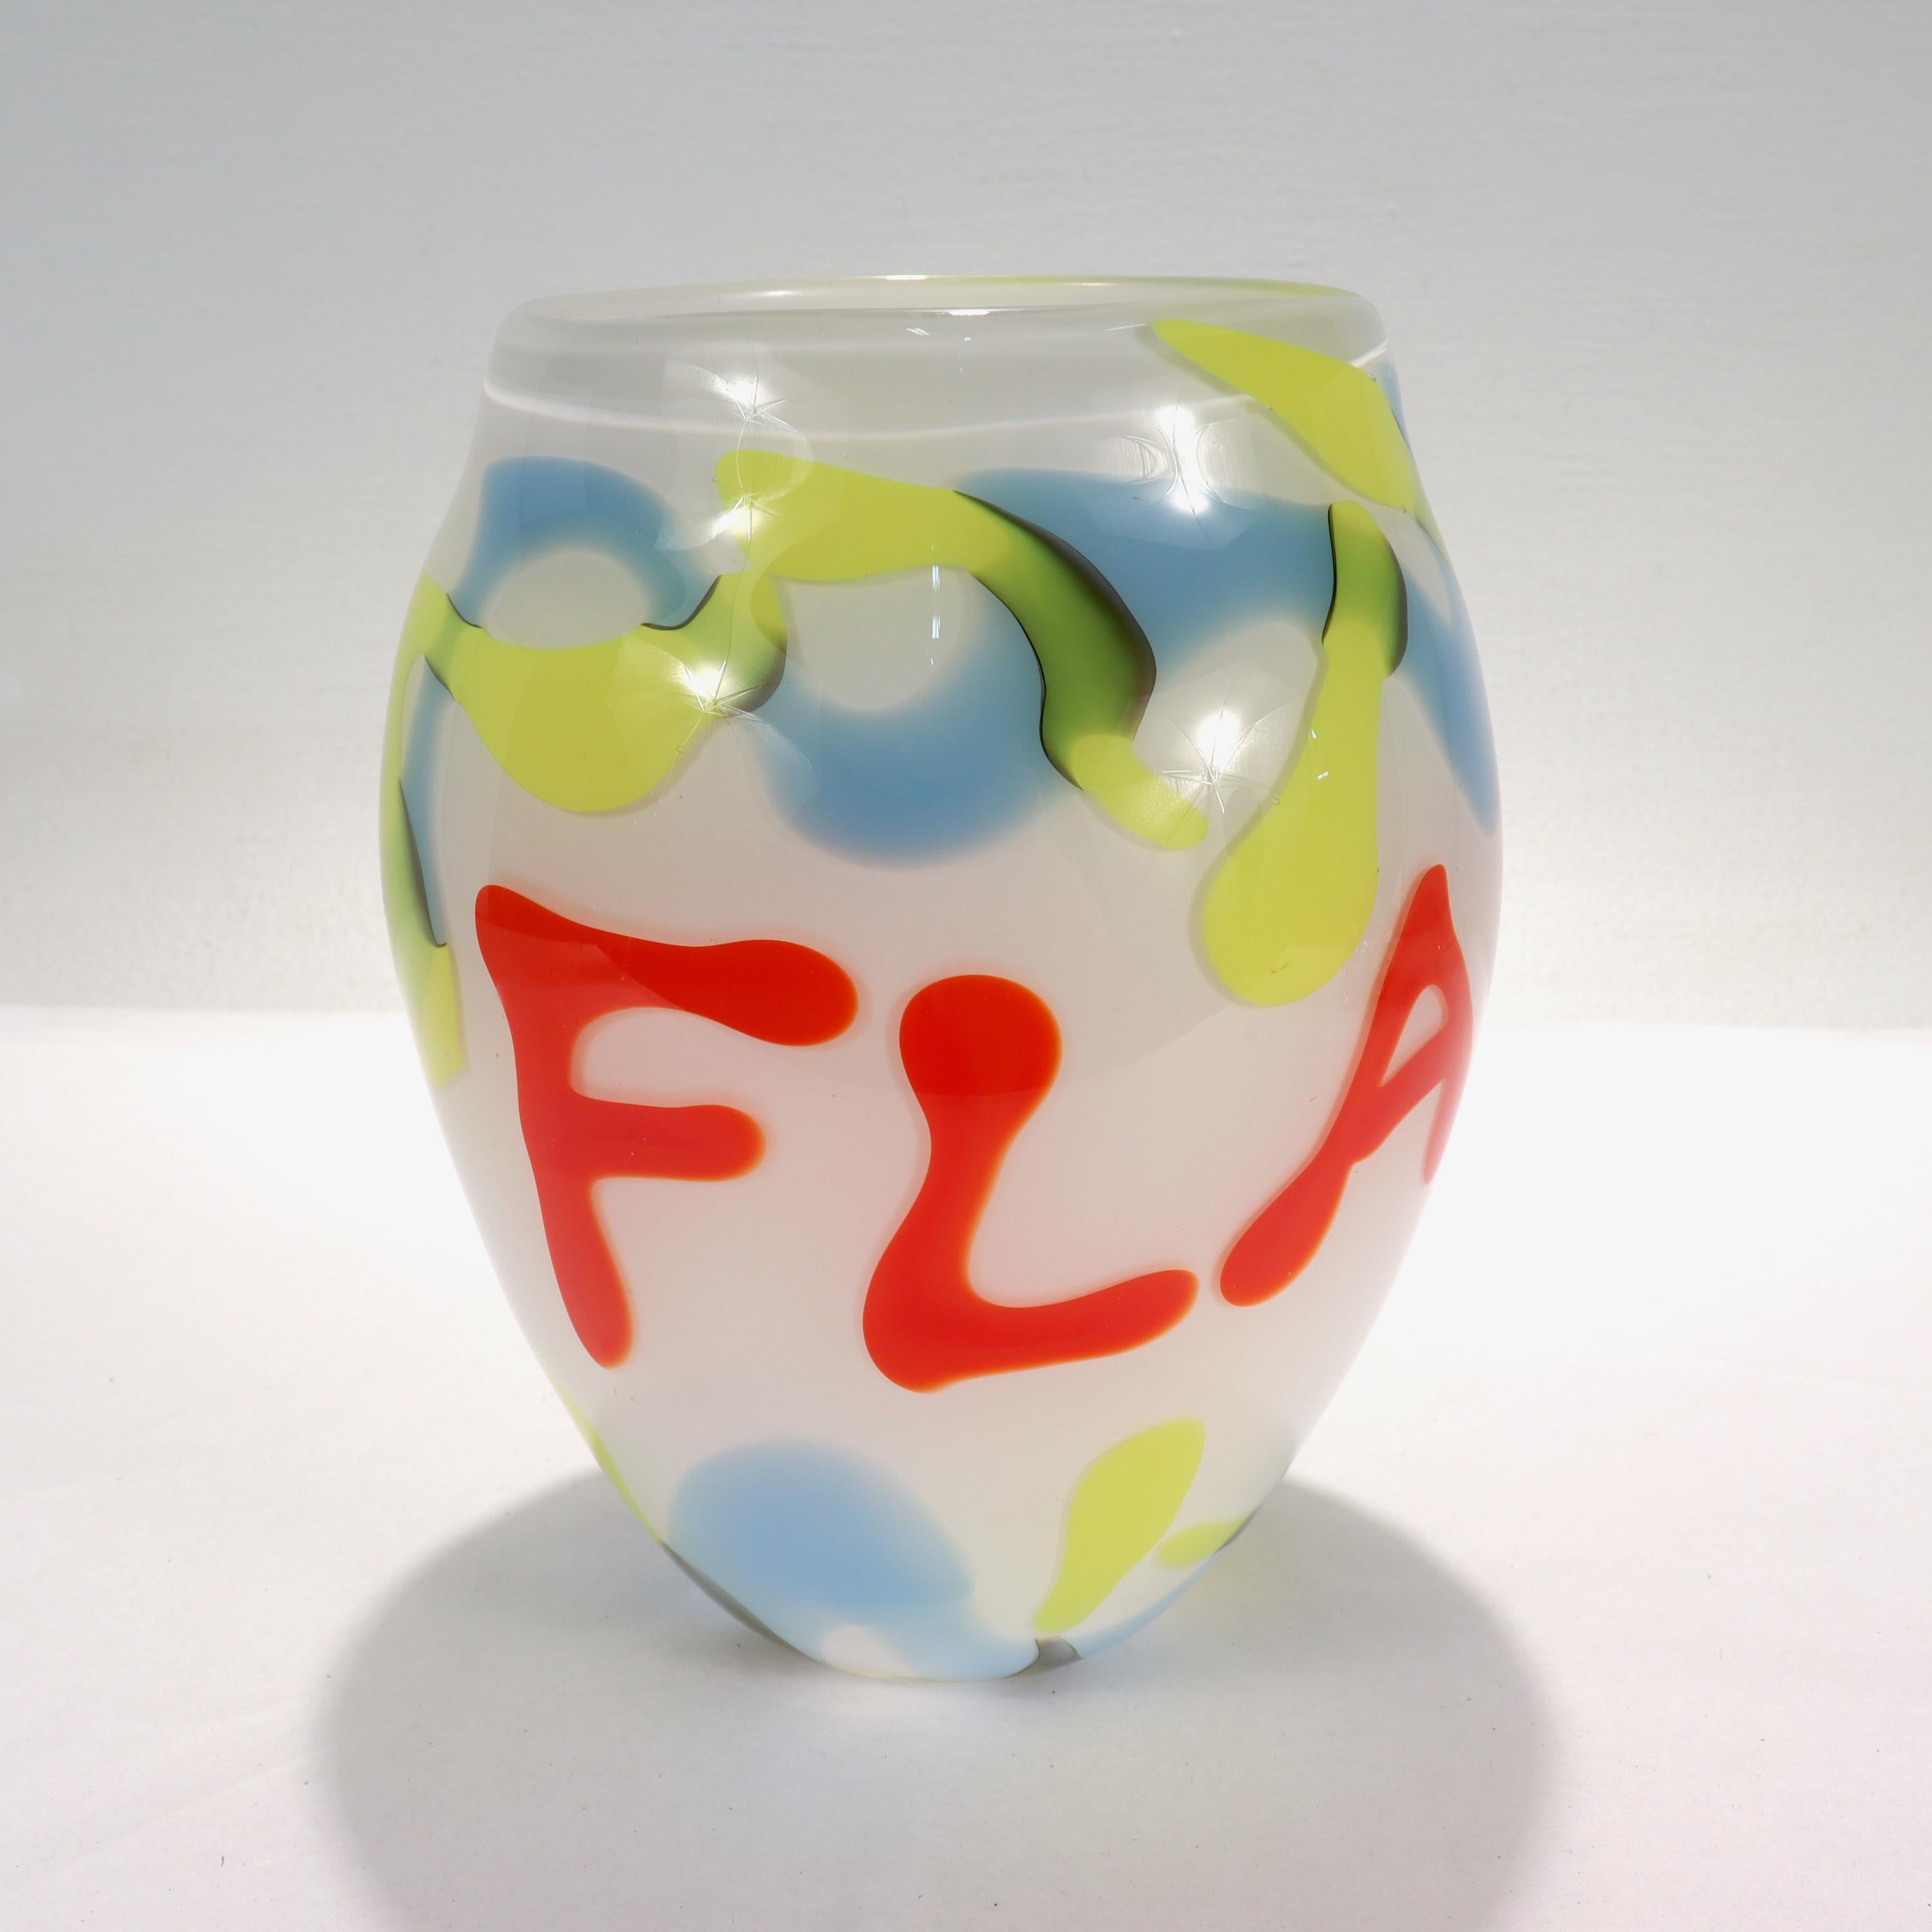 A very fine Pop-Art Post-Modern art glass vase.

Decorated with a red 